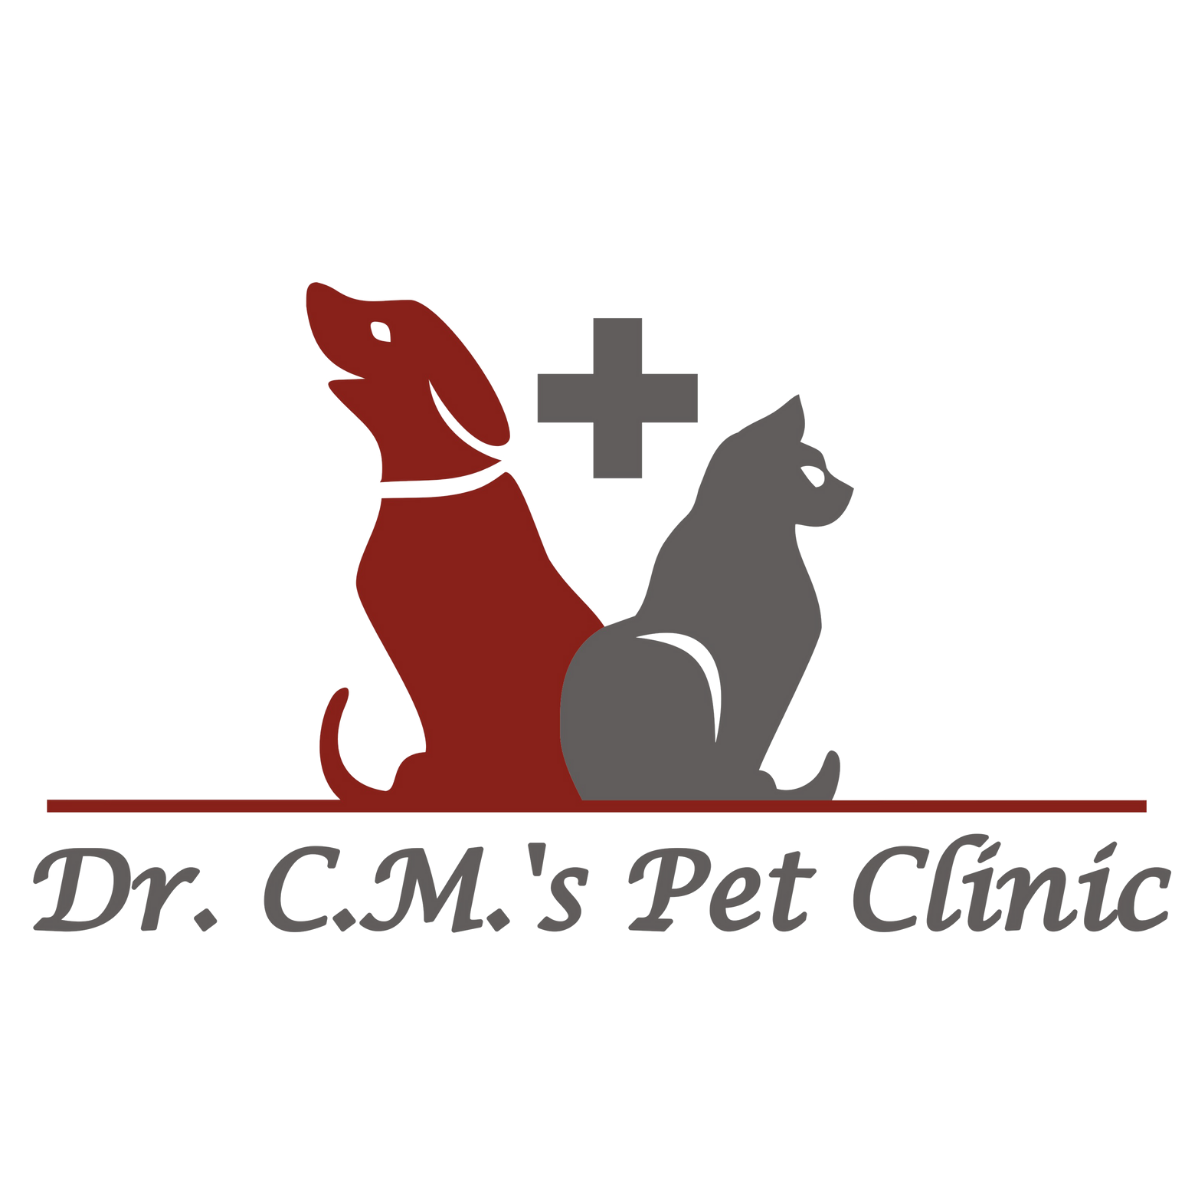 Dr.C.M.'s Pet Clinic|Veterinary|Medical Services